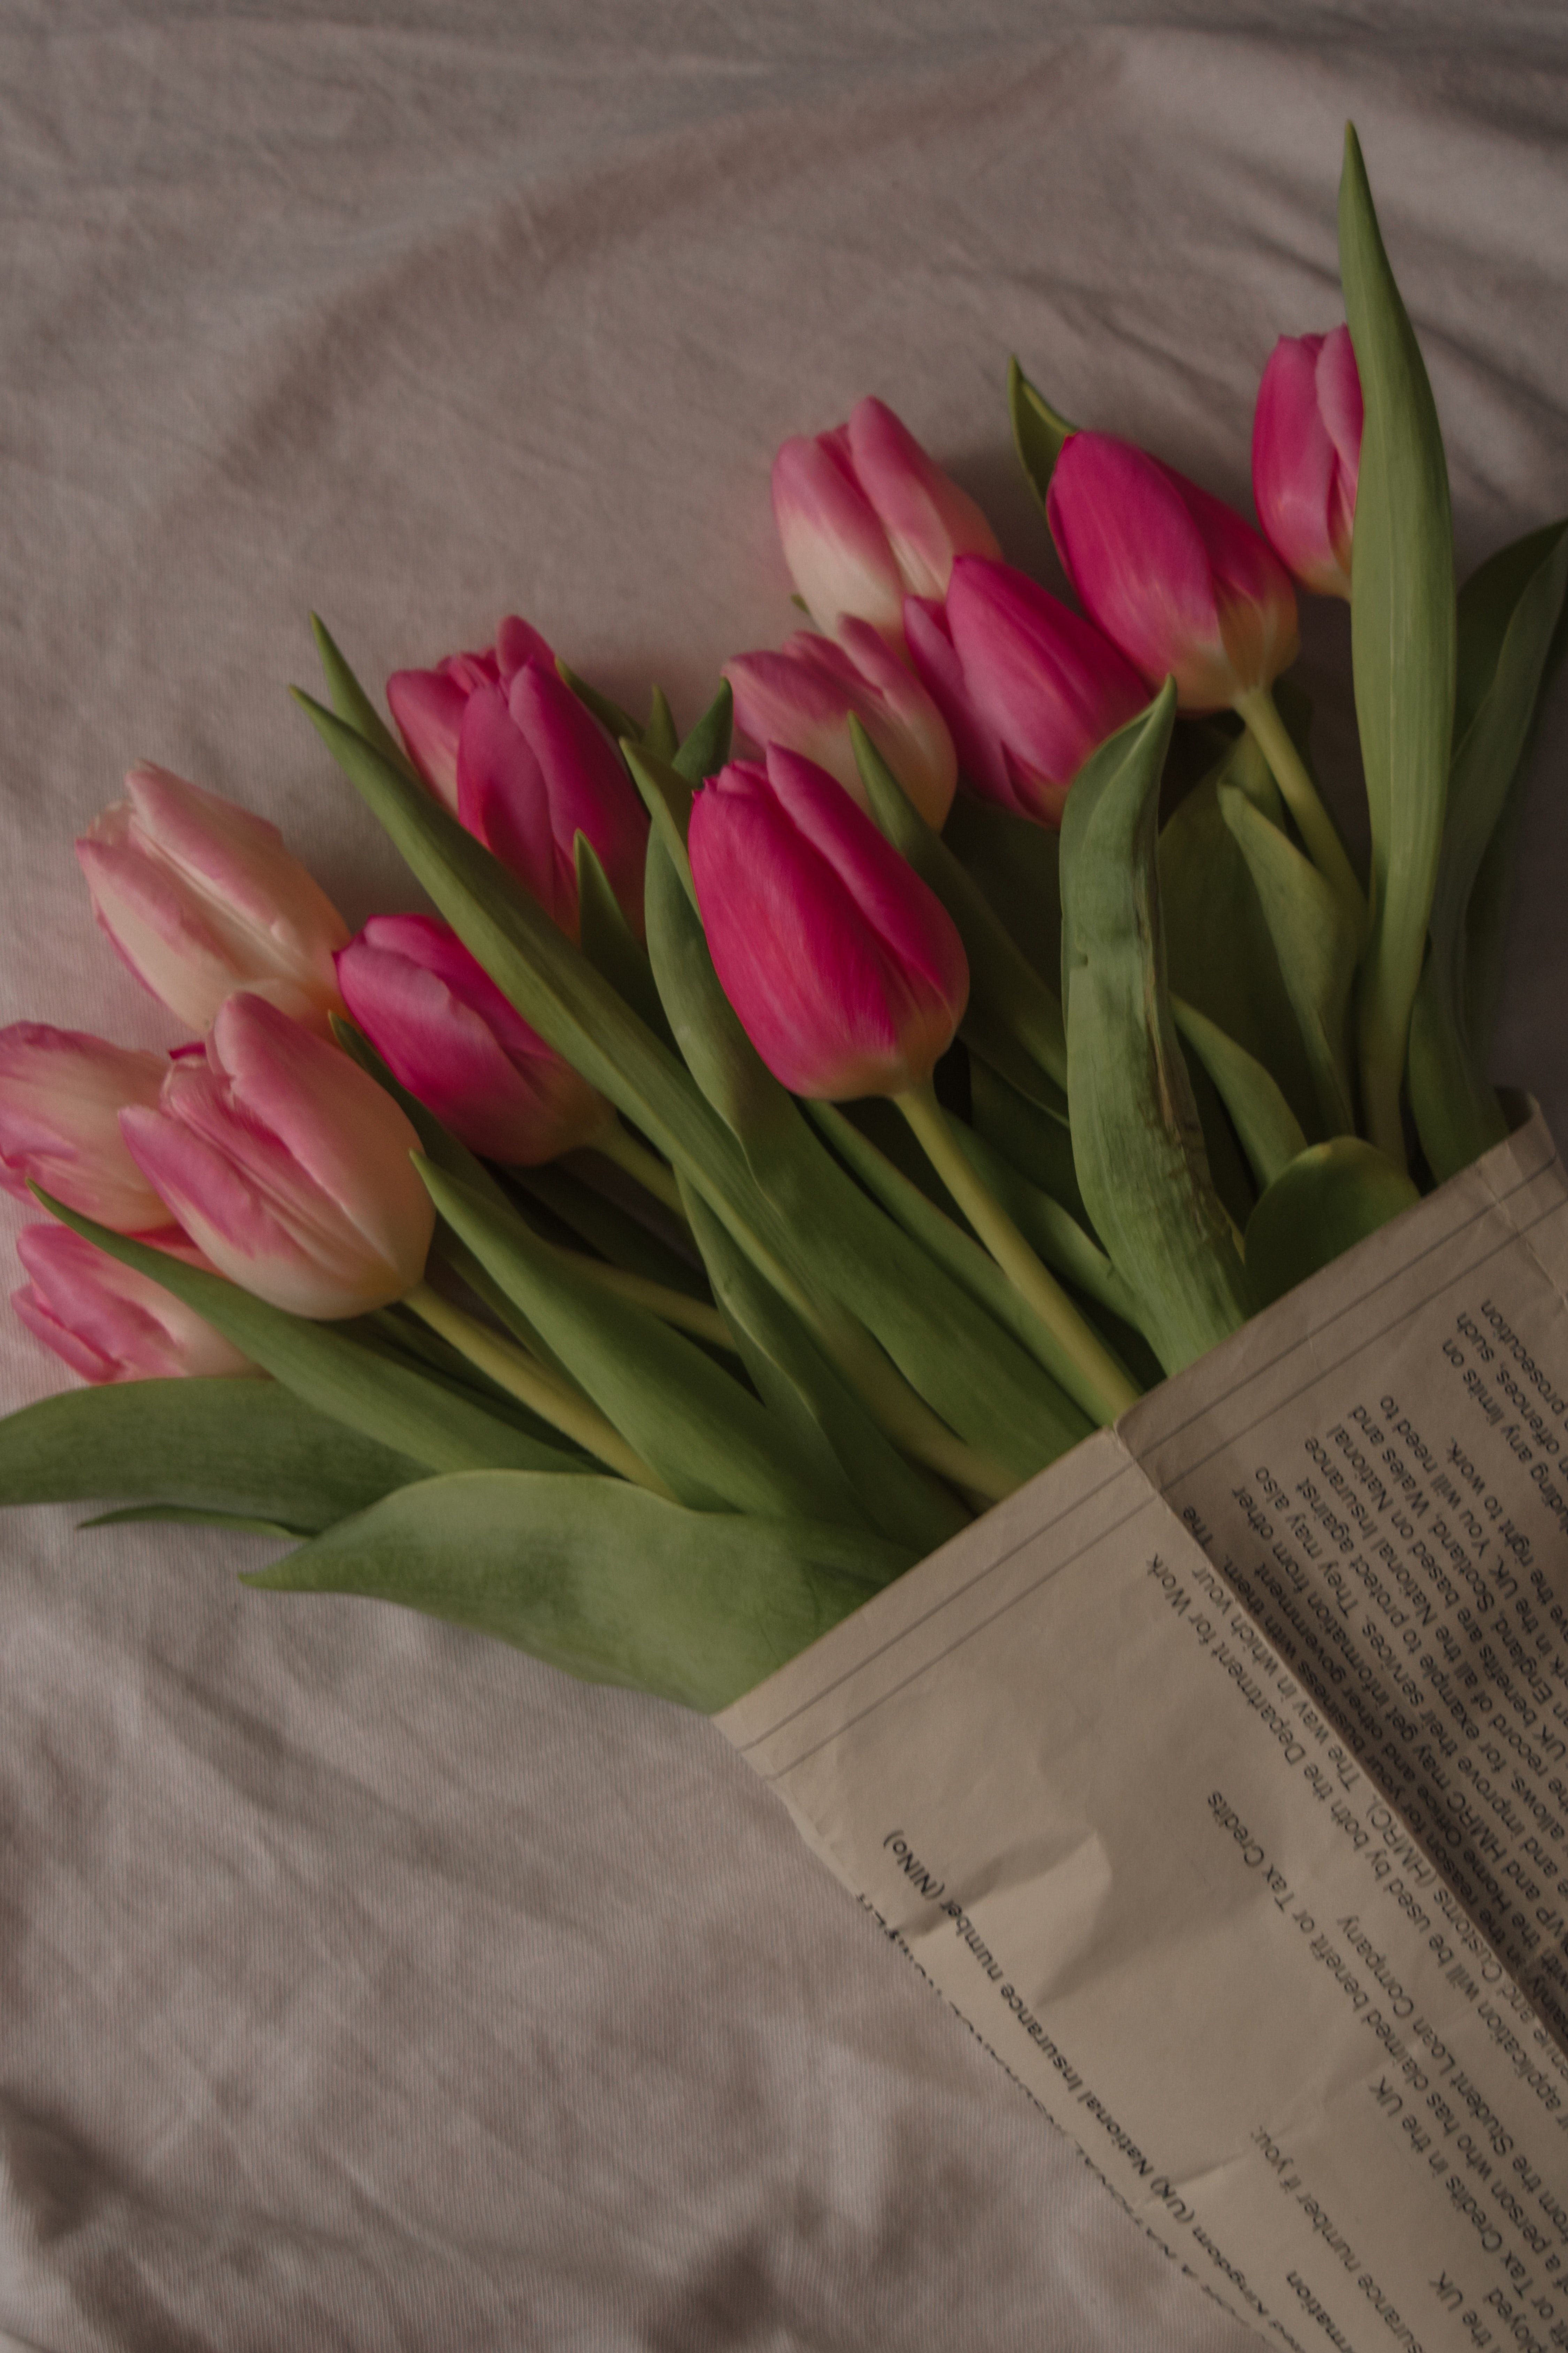 A bouquet of pink tulips sits on a bed next to an open book. - Tulip